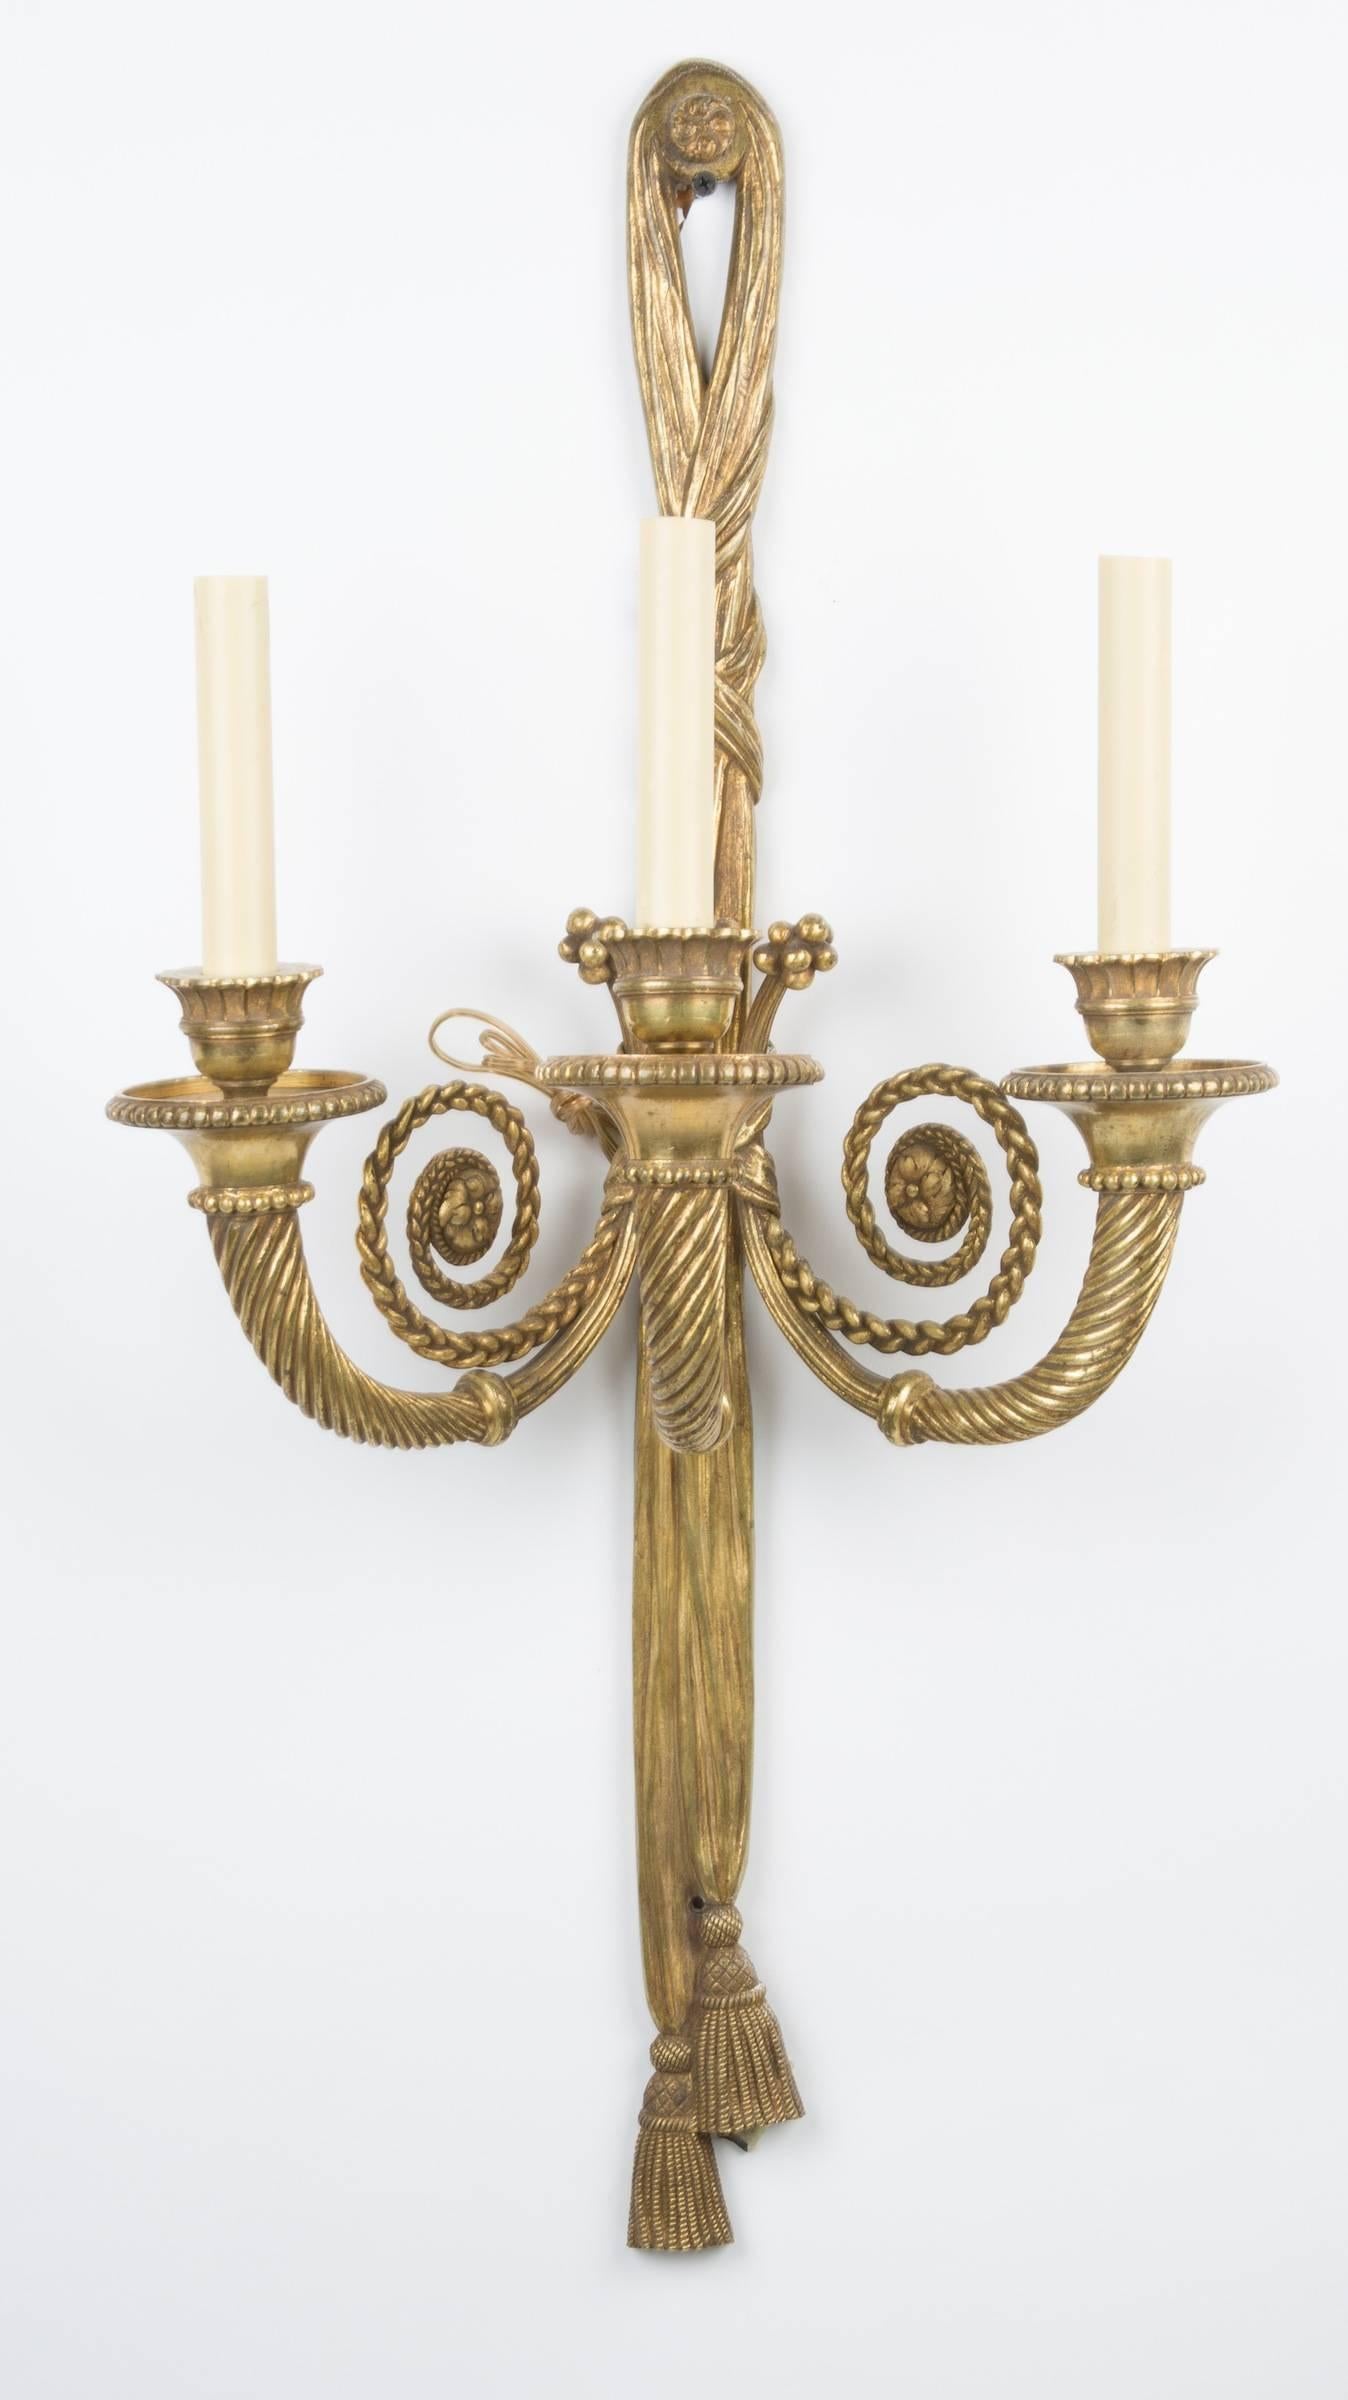 A pair of French Louis XVI-style three-light sconces, the backs in the form of draped cord with cross bands terminating in tassels, each candle arm with spiral twist fluting.